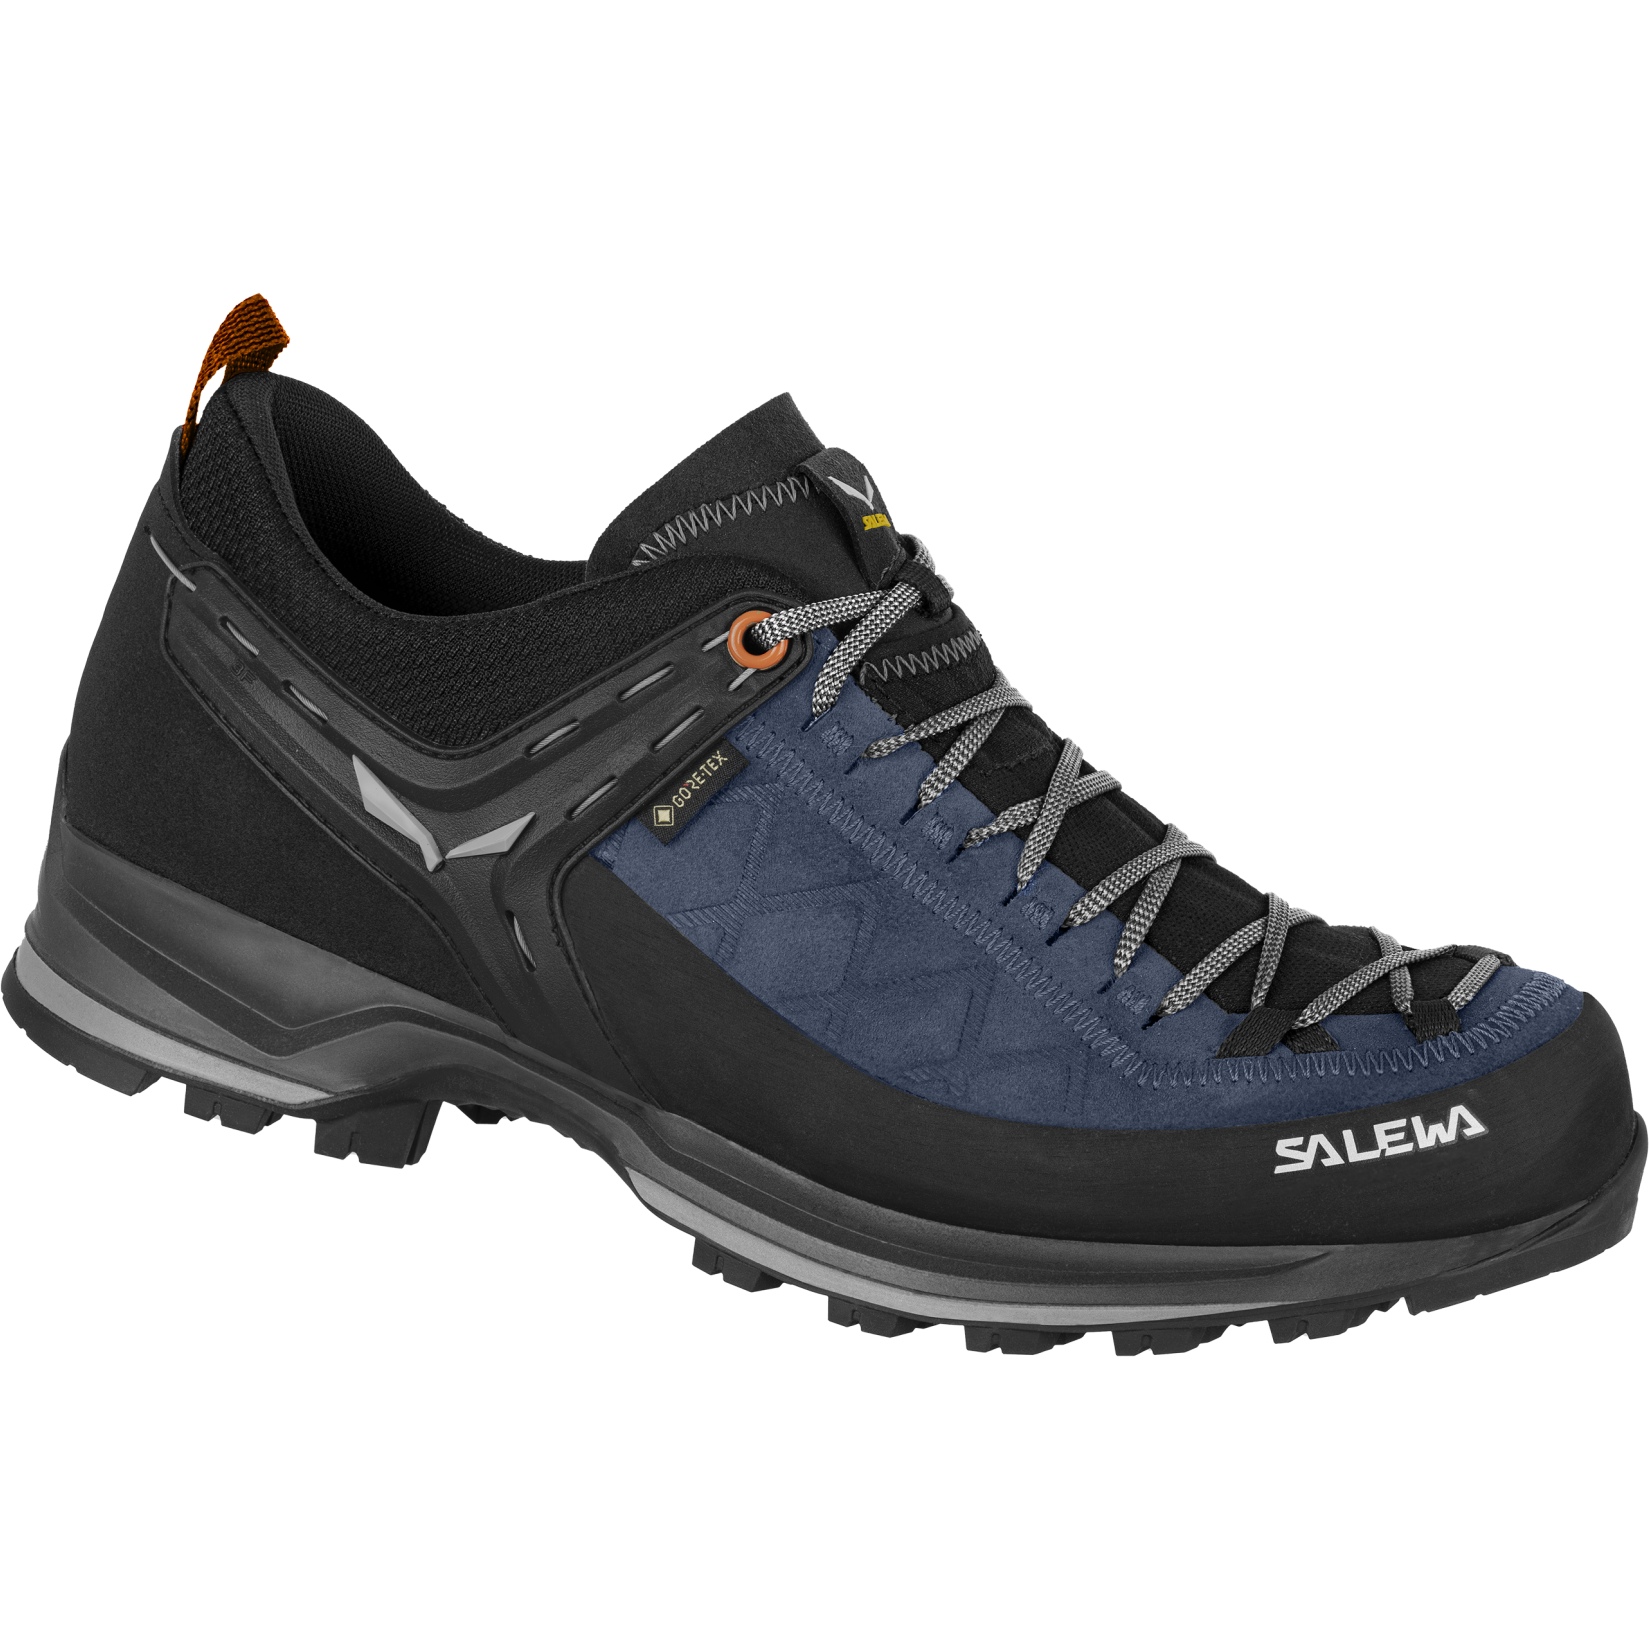 Picture of Salewa Mountain Trainer 2 GTX Hiking Shoes Men - blue seal/black 2490